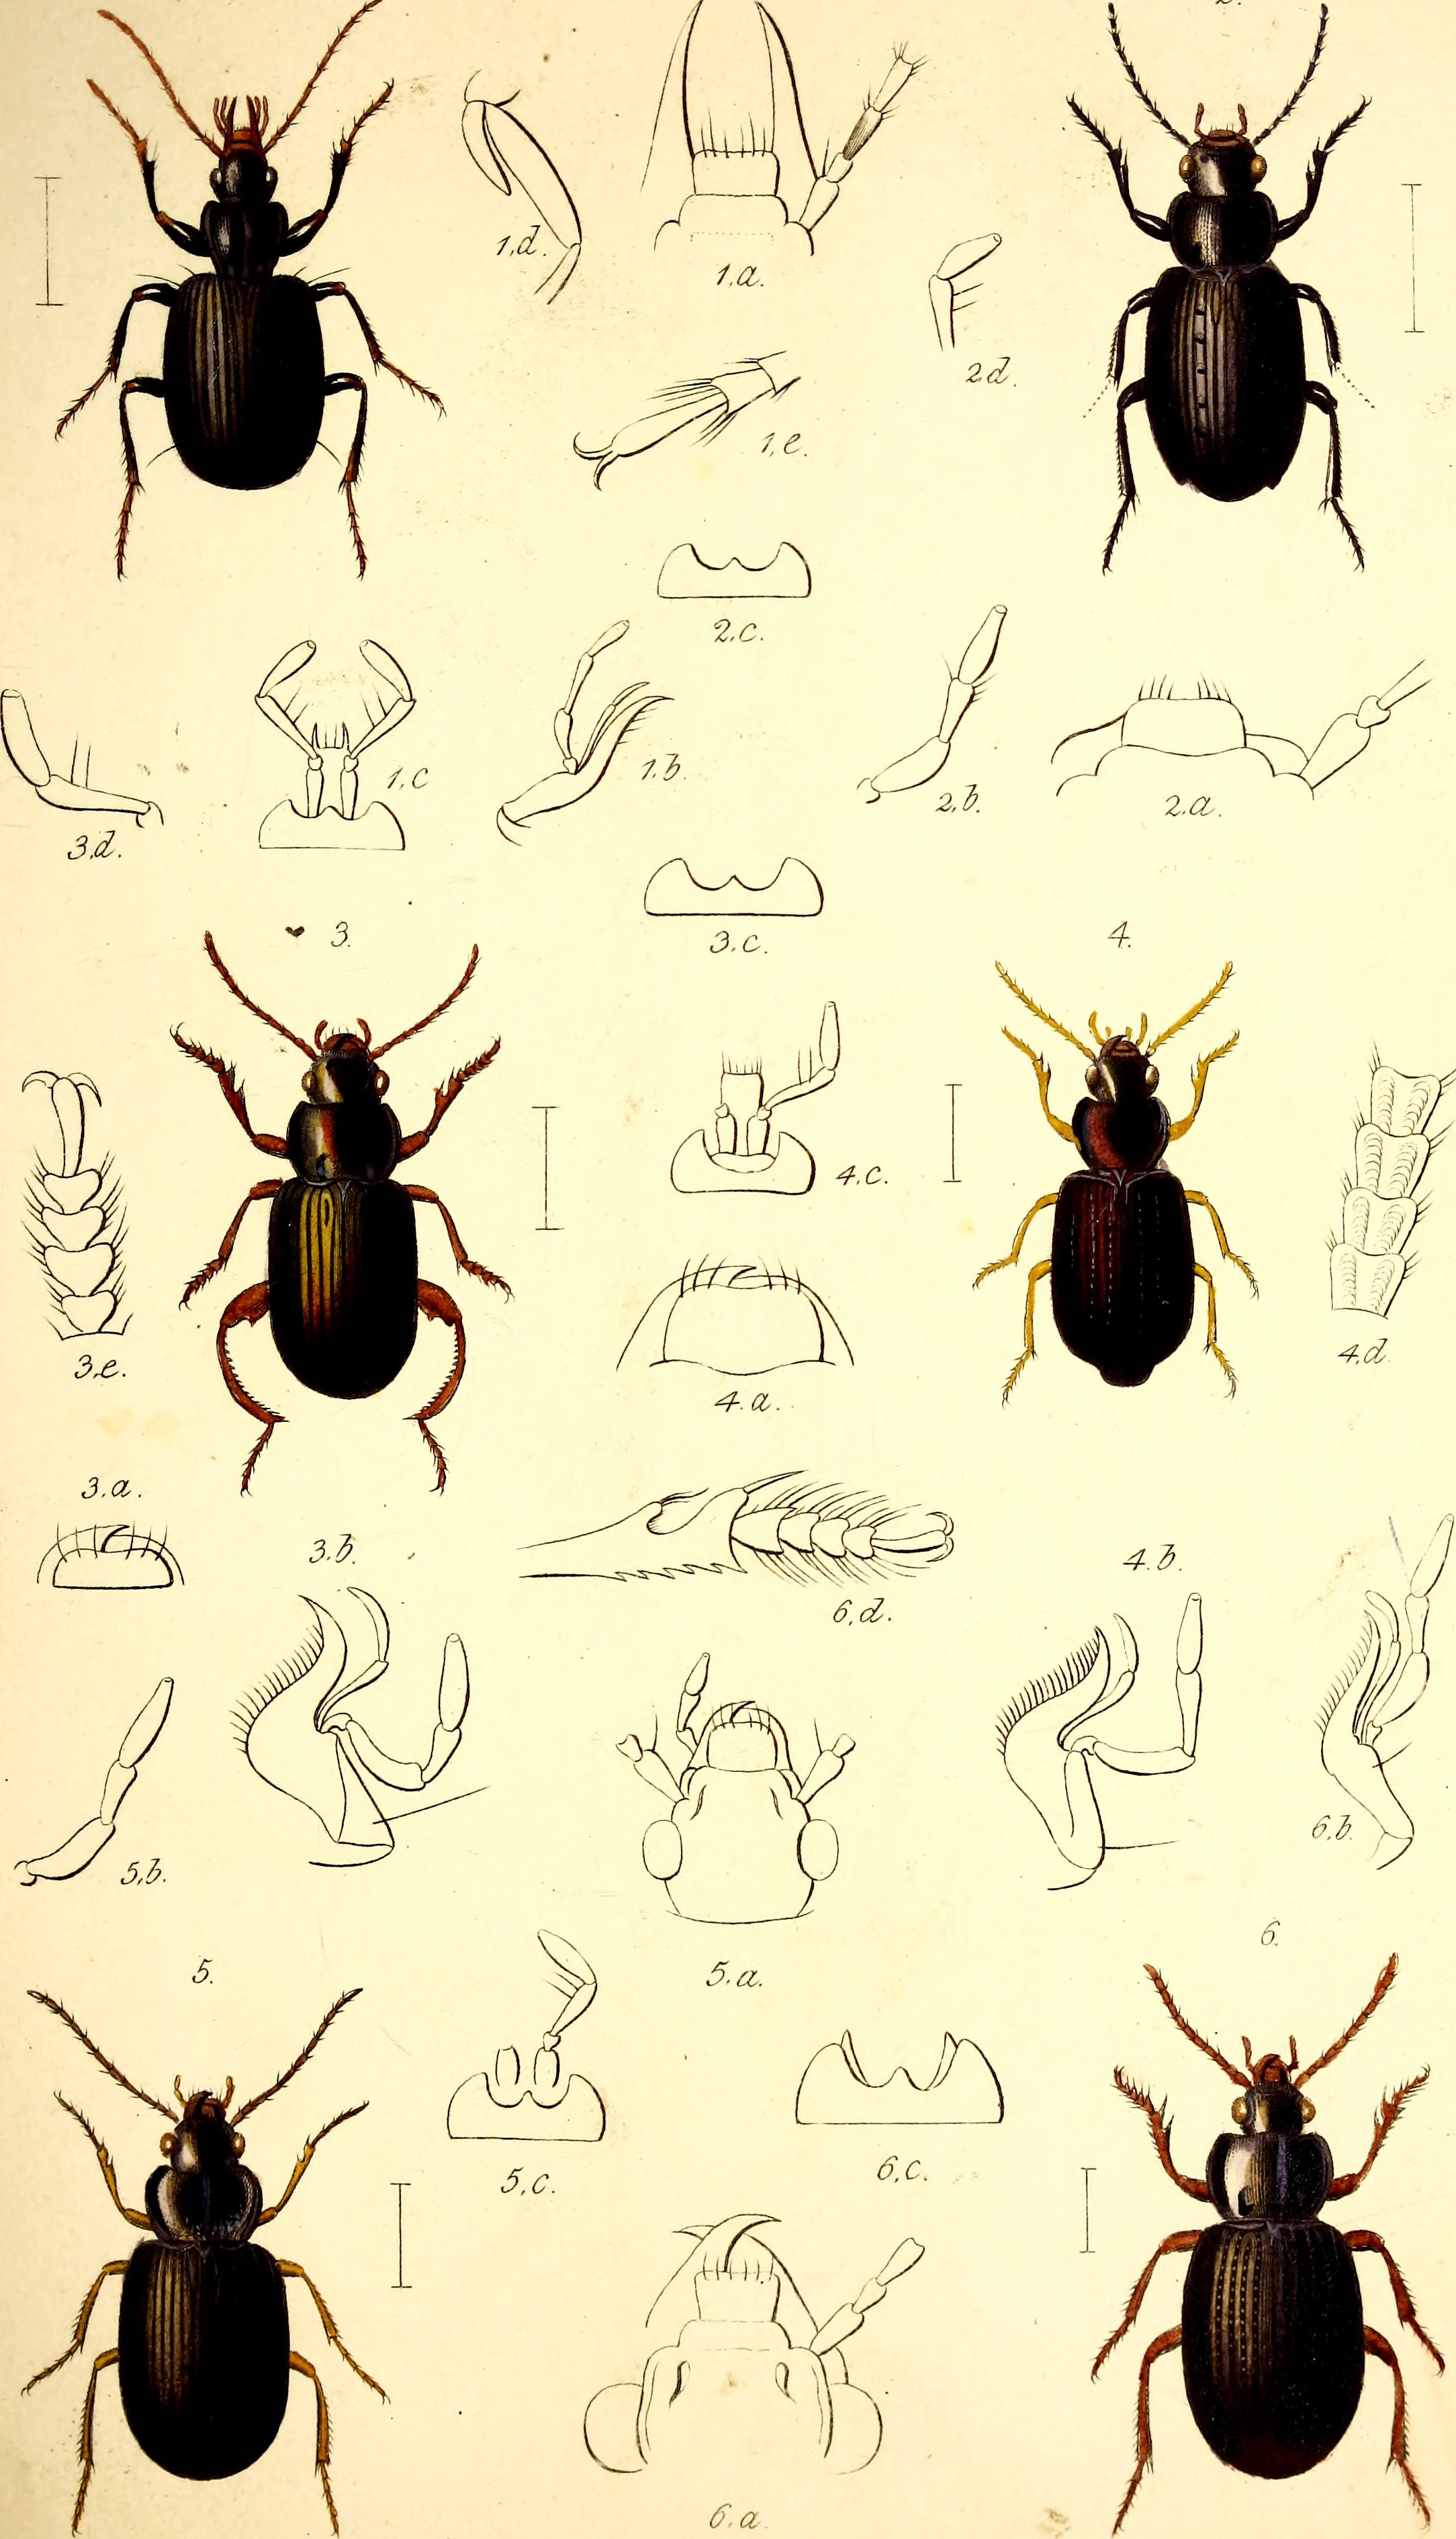 The coleopterist's manual (1837) (20636765166)